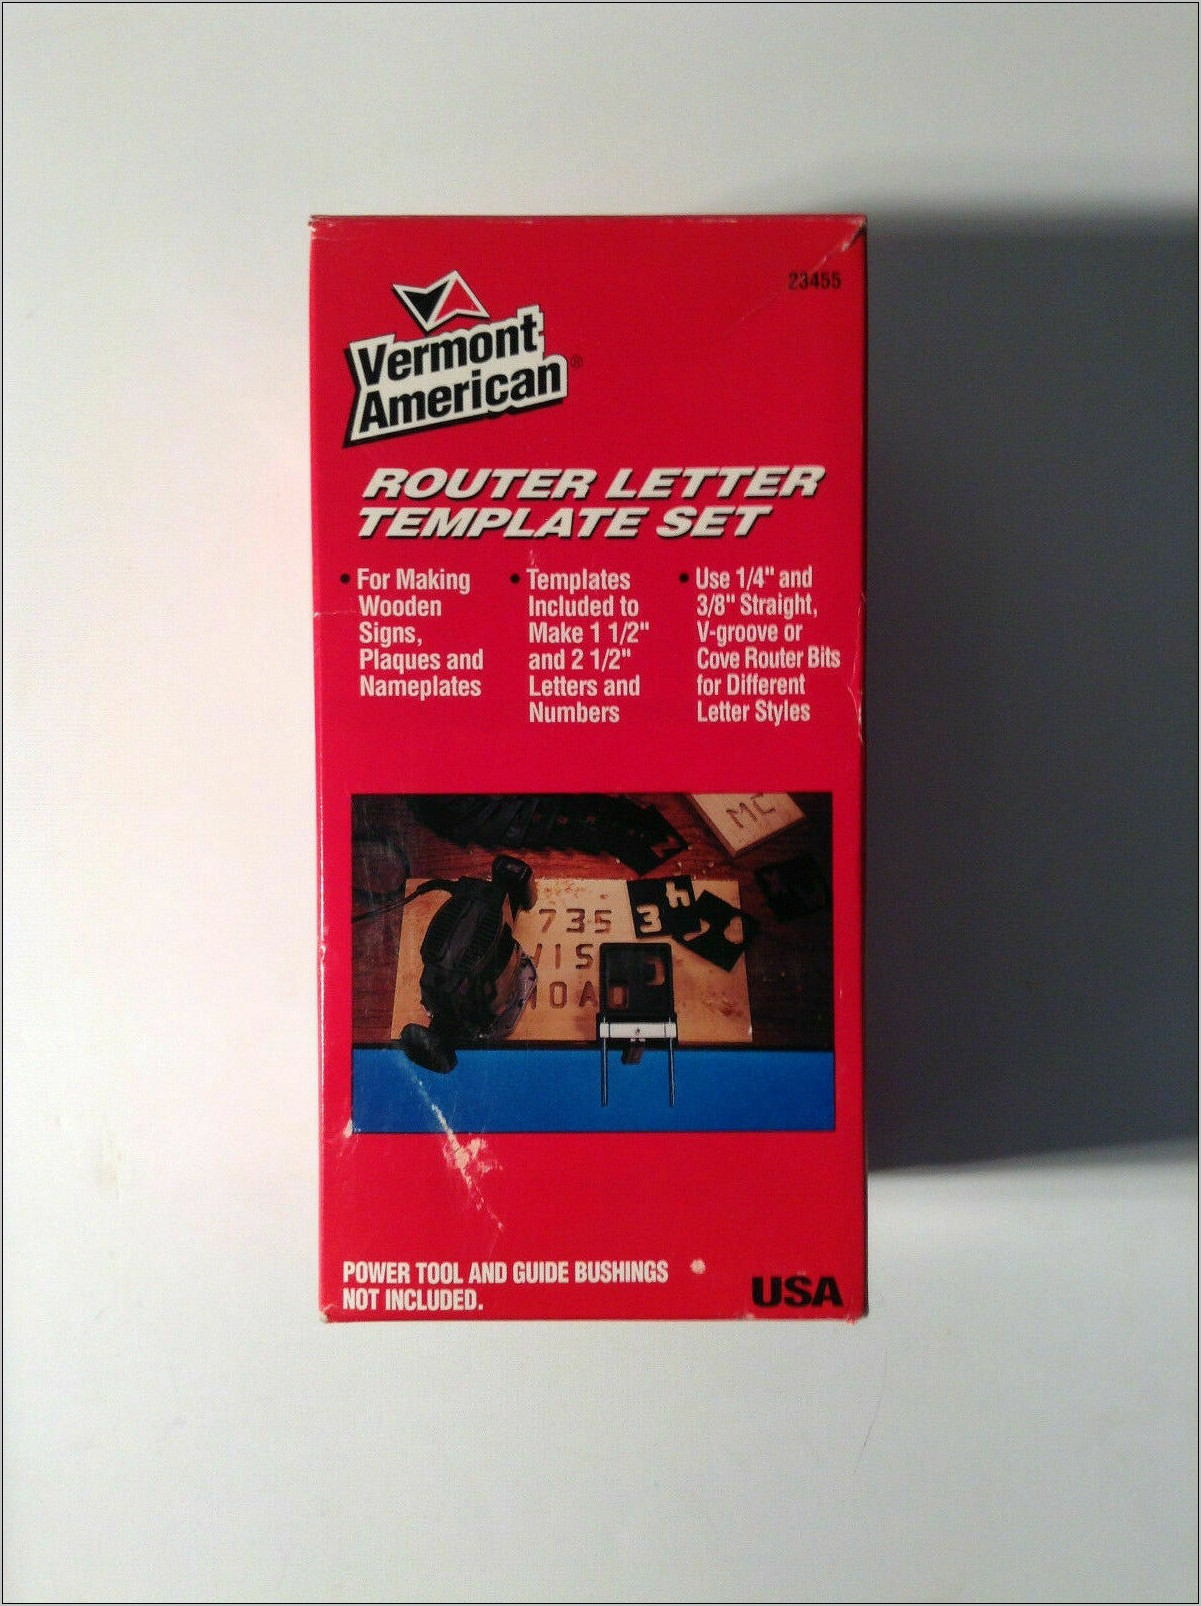 Vermont American Router Letter Template Set